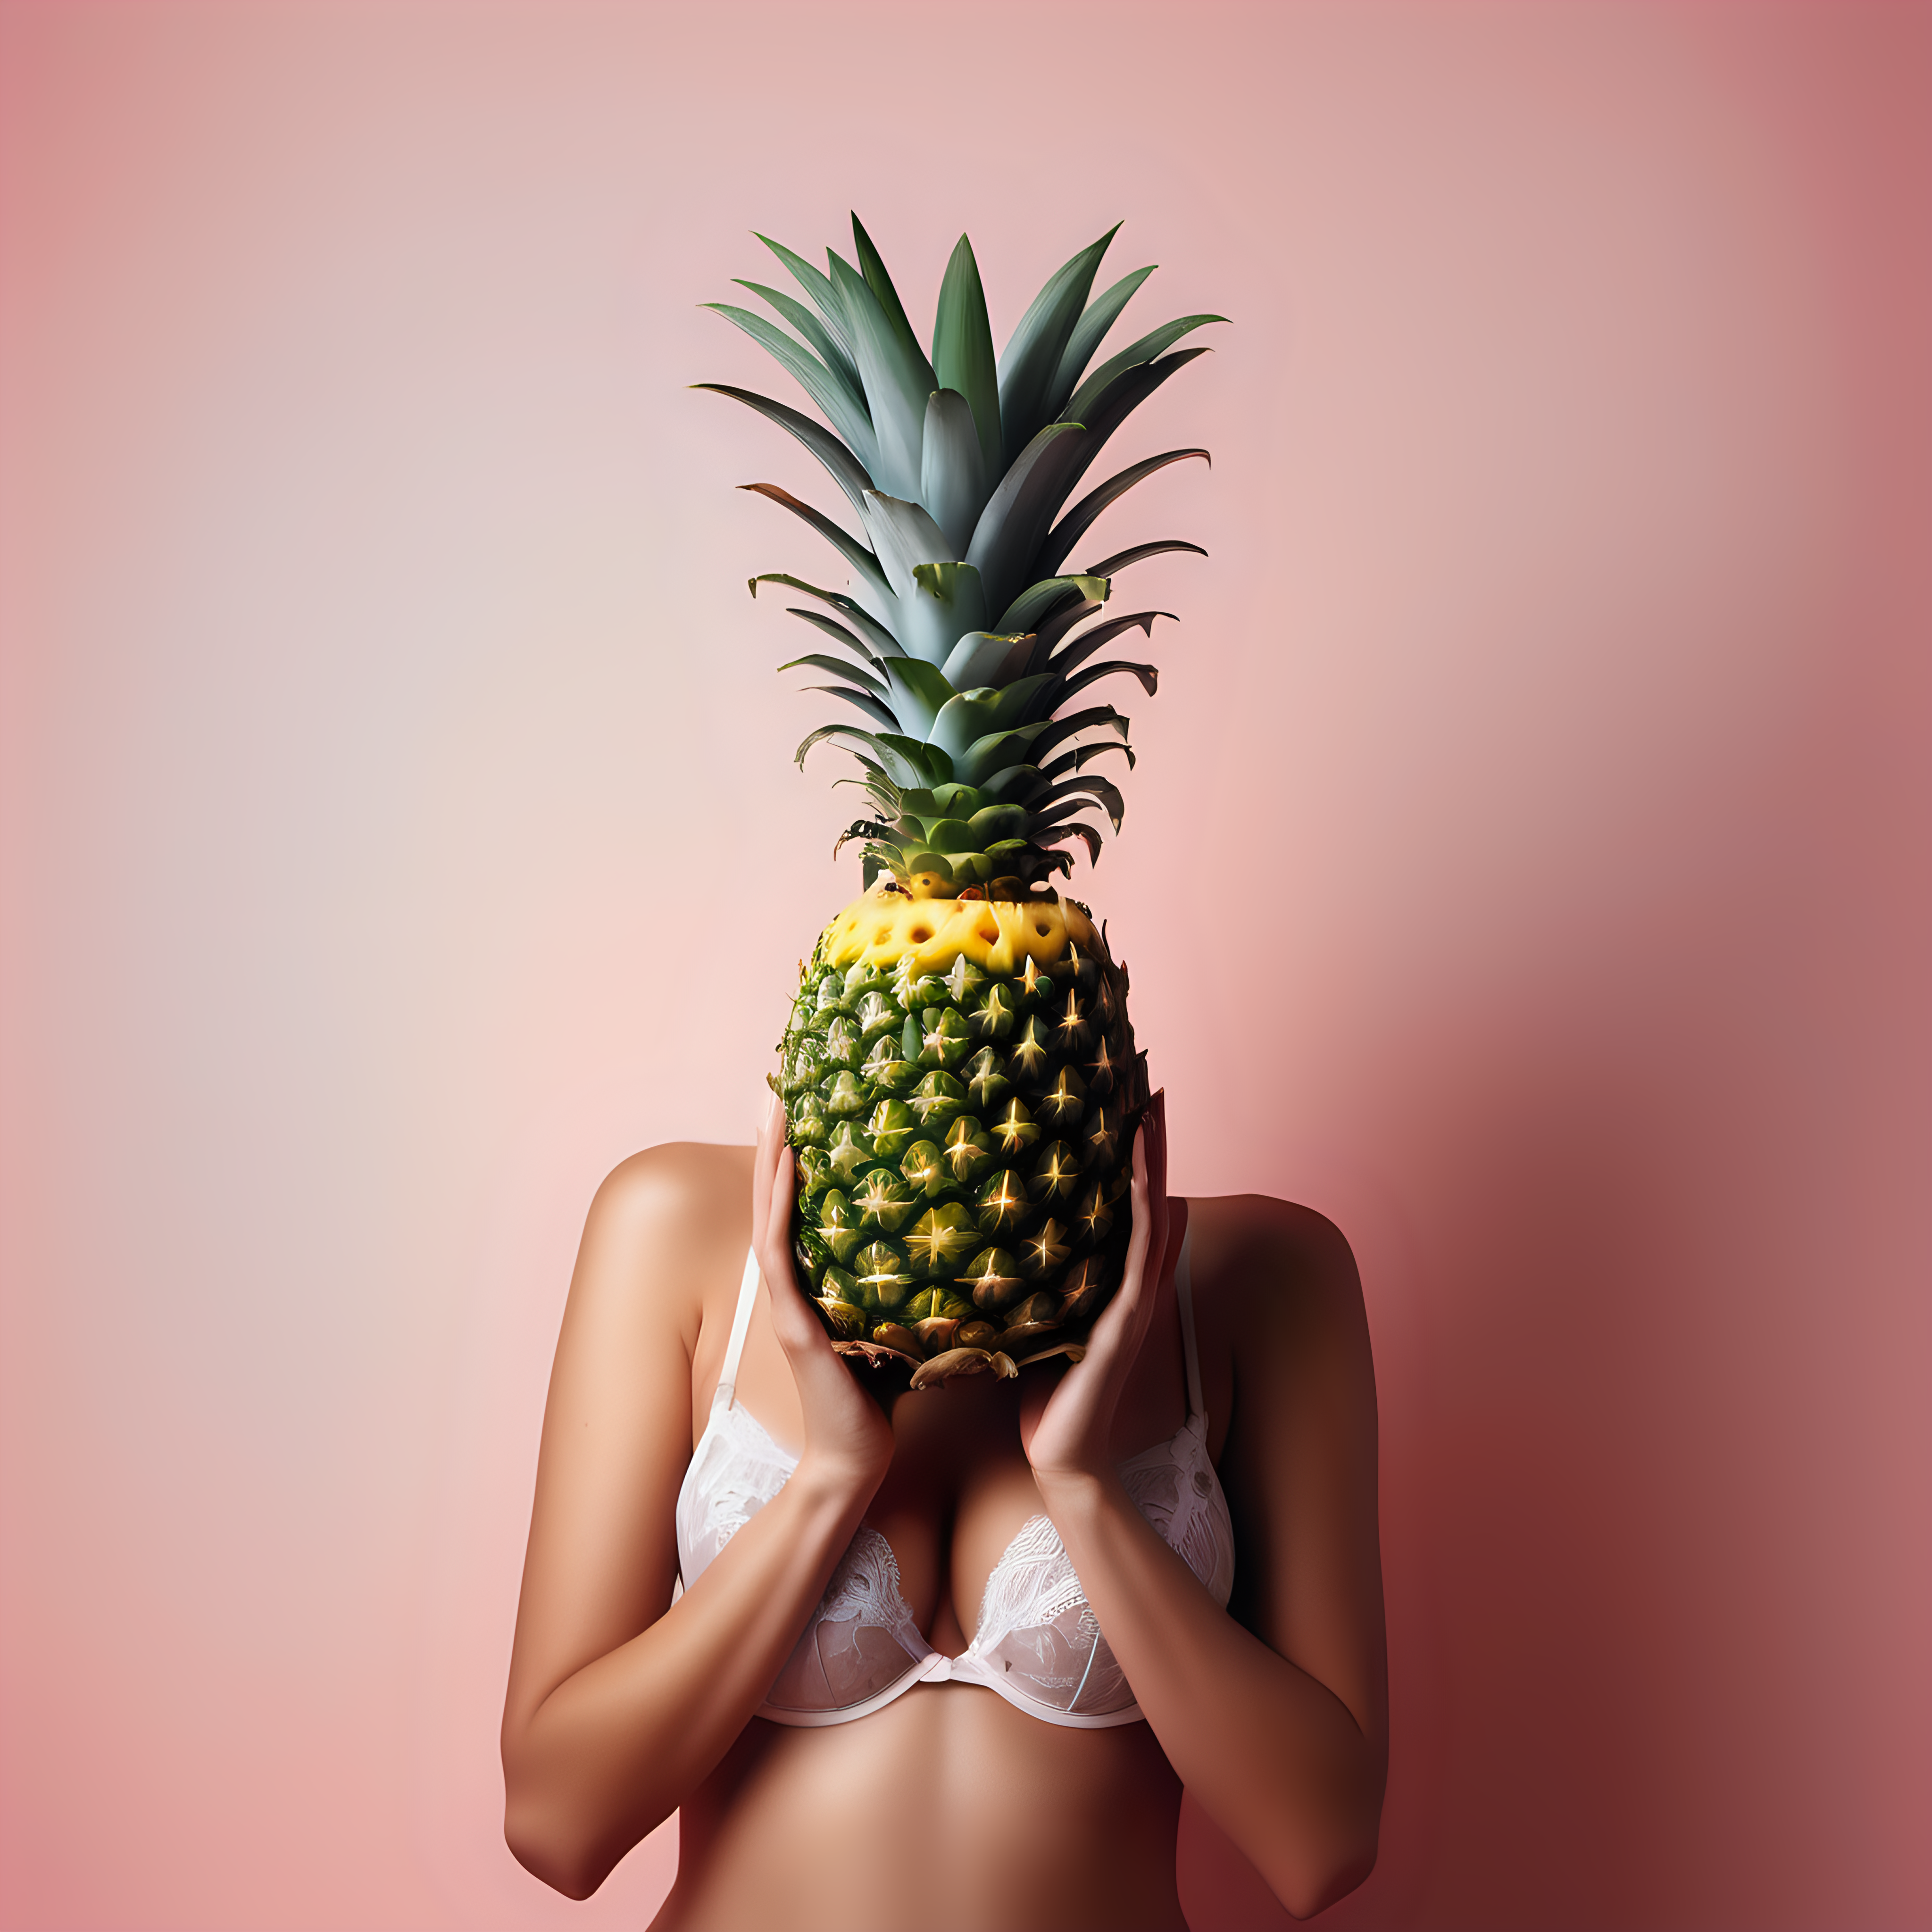 Create an abstract photo of a pineapple held